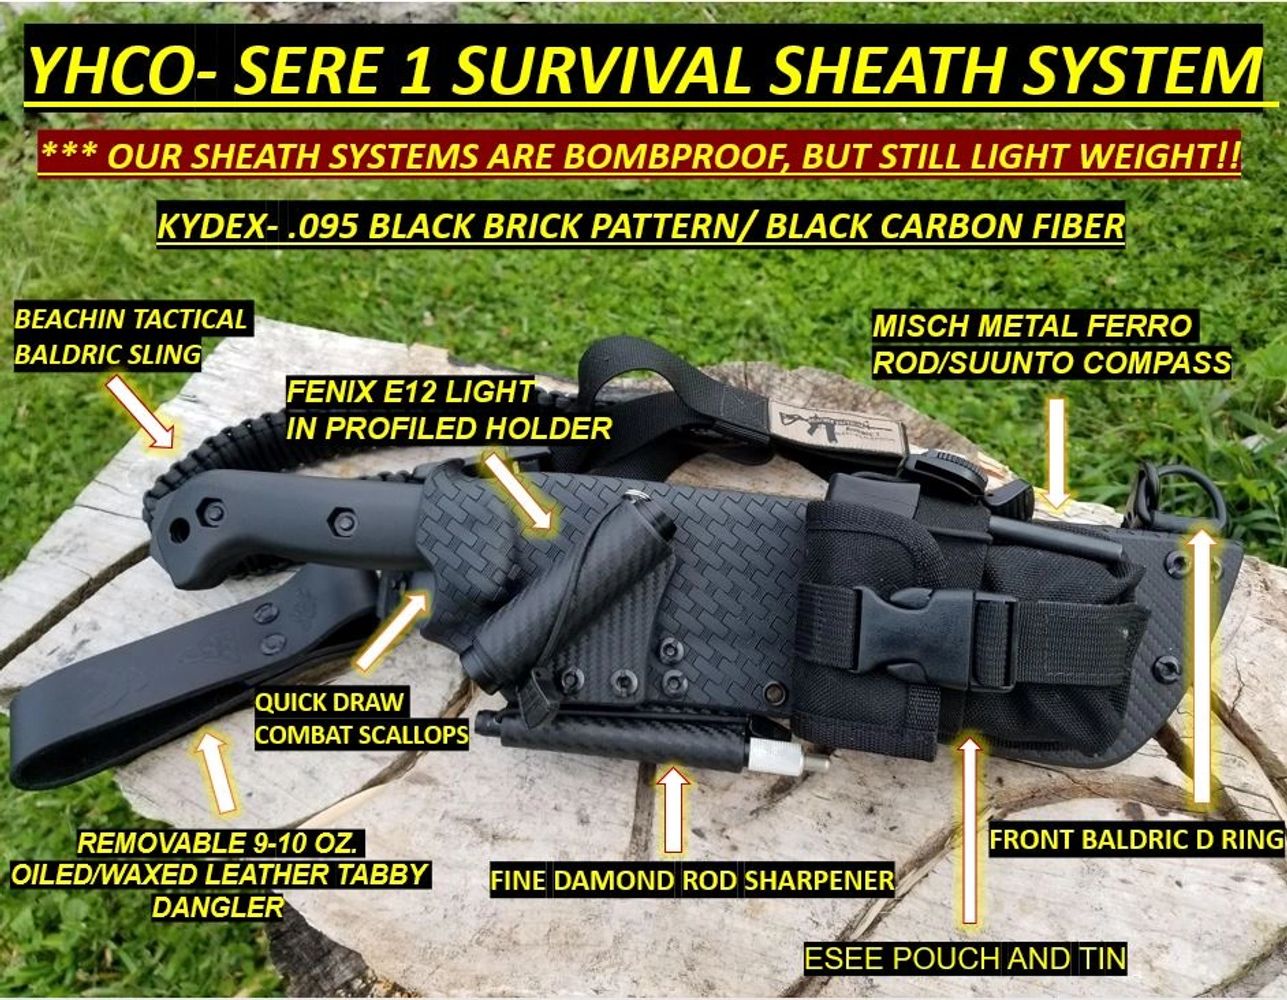 High Speed Gear Reveals More About Their Kydex Line - Soldier Systems Daily